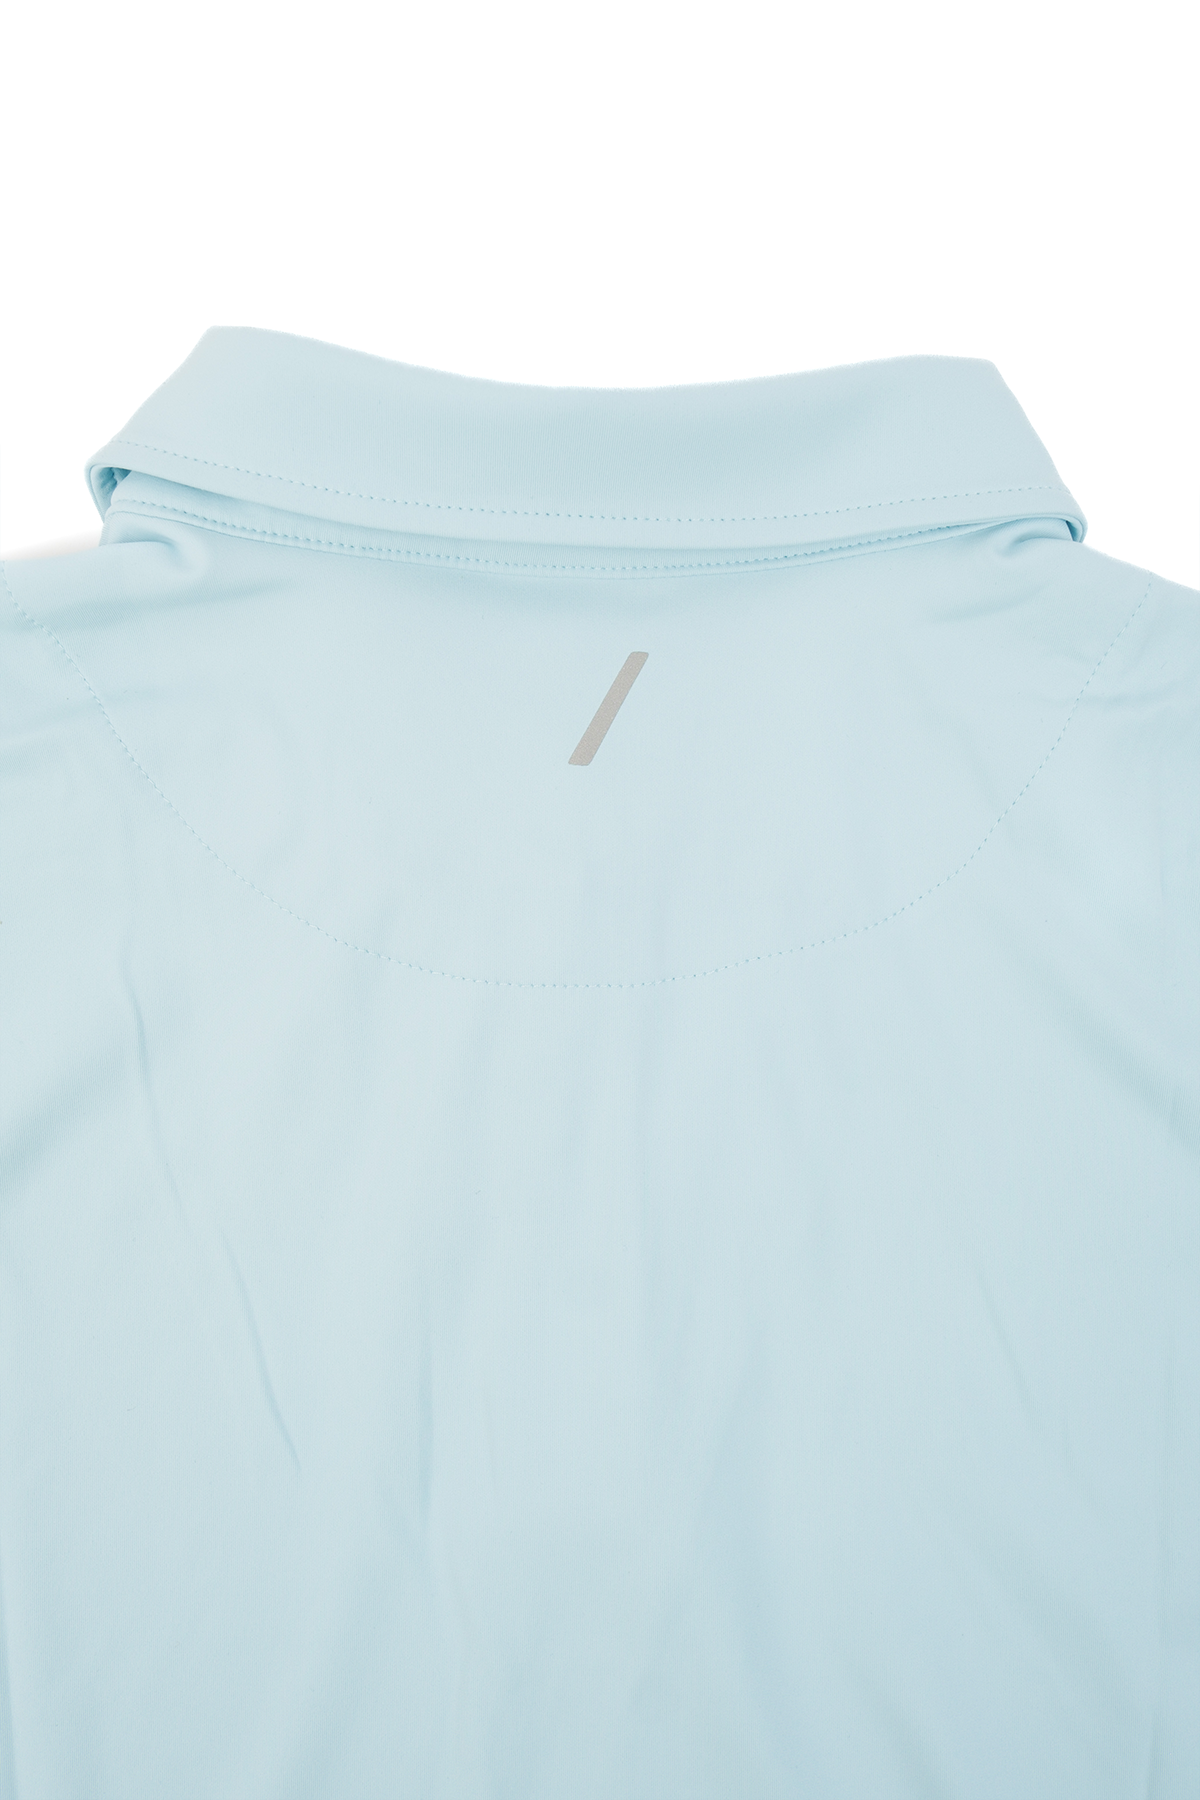 Backside close up of Light blue golf polo laid flat on a white background.